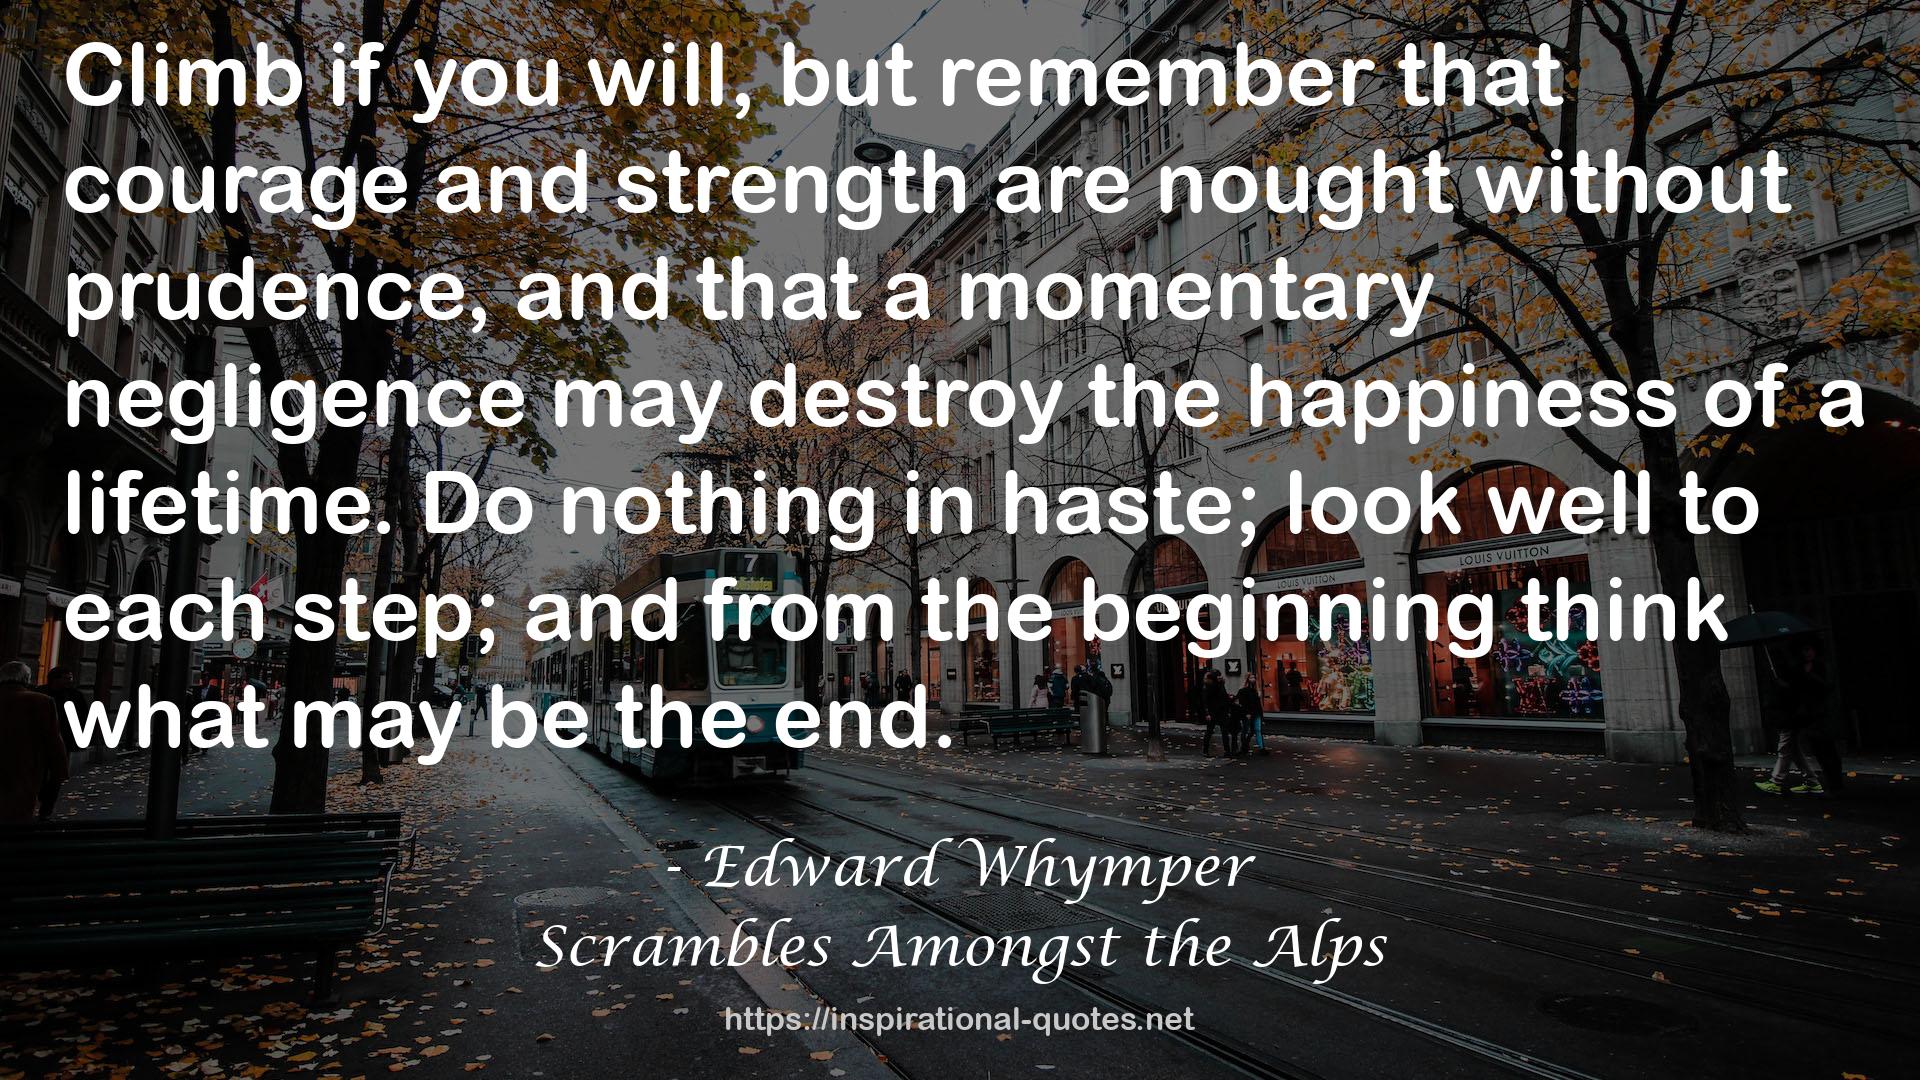 Scrambles Amongst the Alps QUOTES